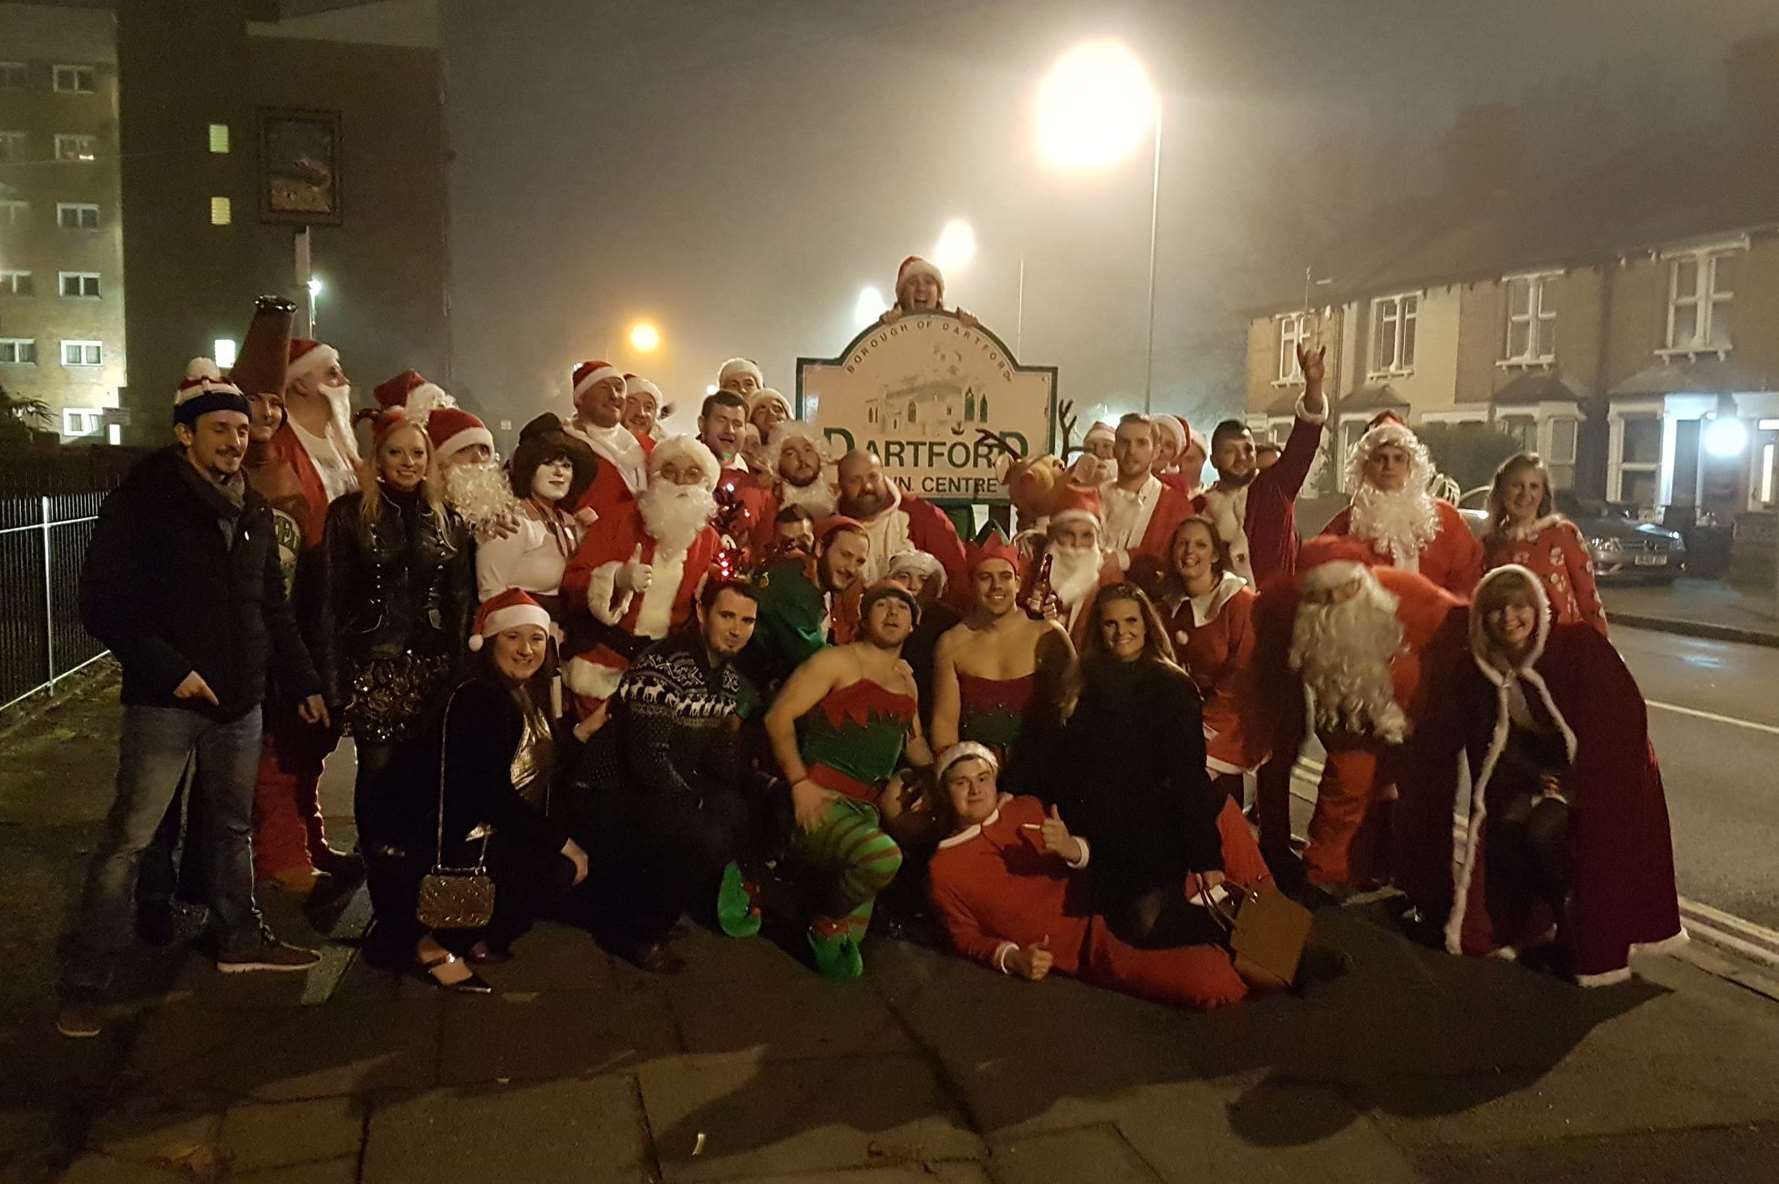 Dartford Valley Rugby Club's 12 Bars of Christmas event raised more than £600 for ellenor